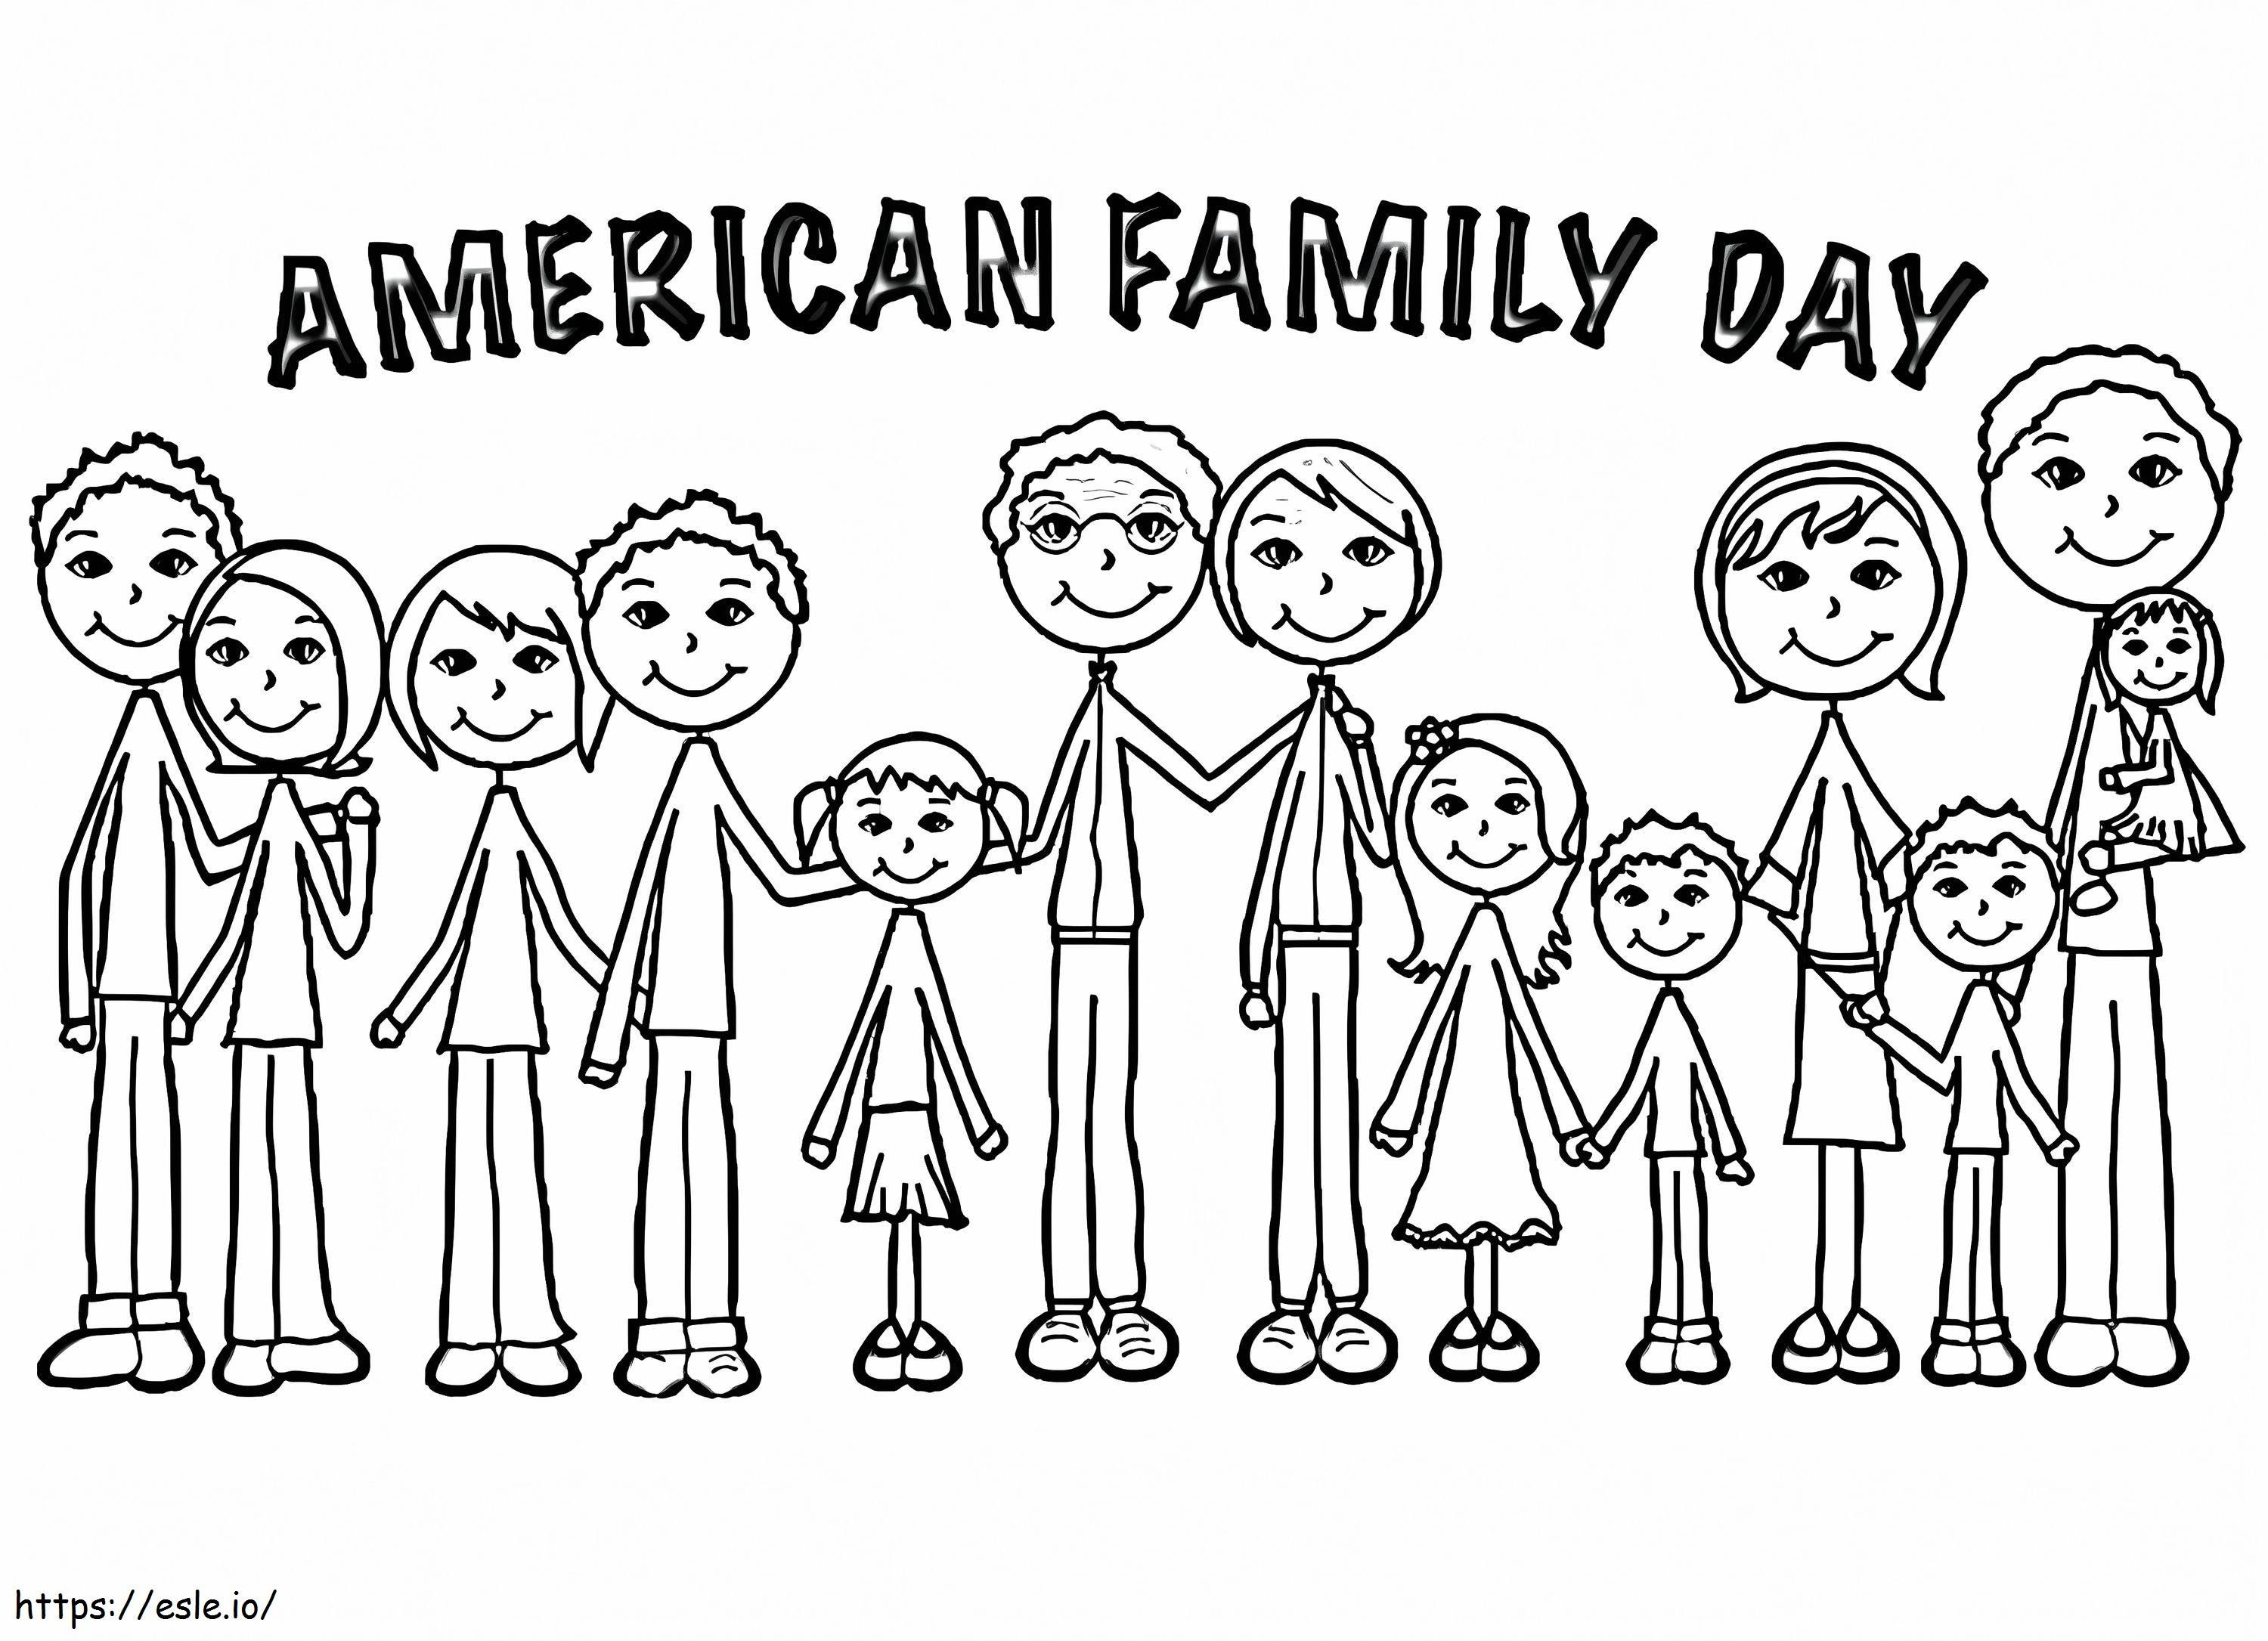 American Family Day coloring page